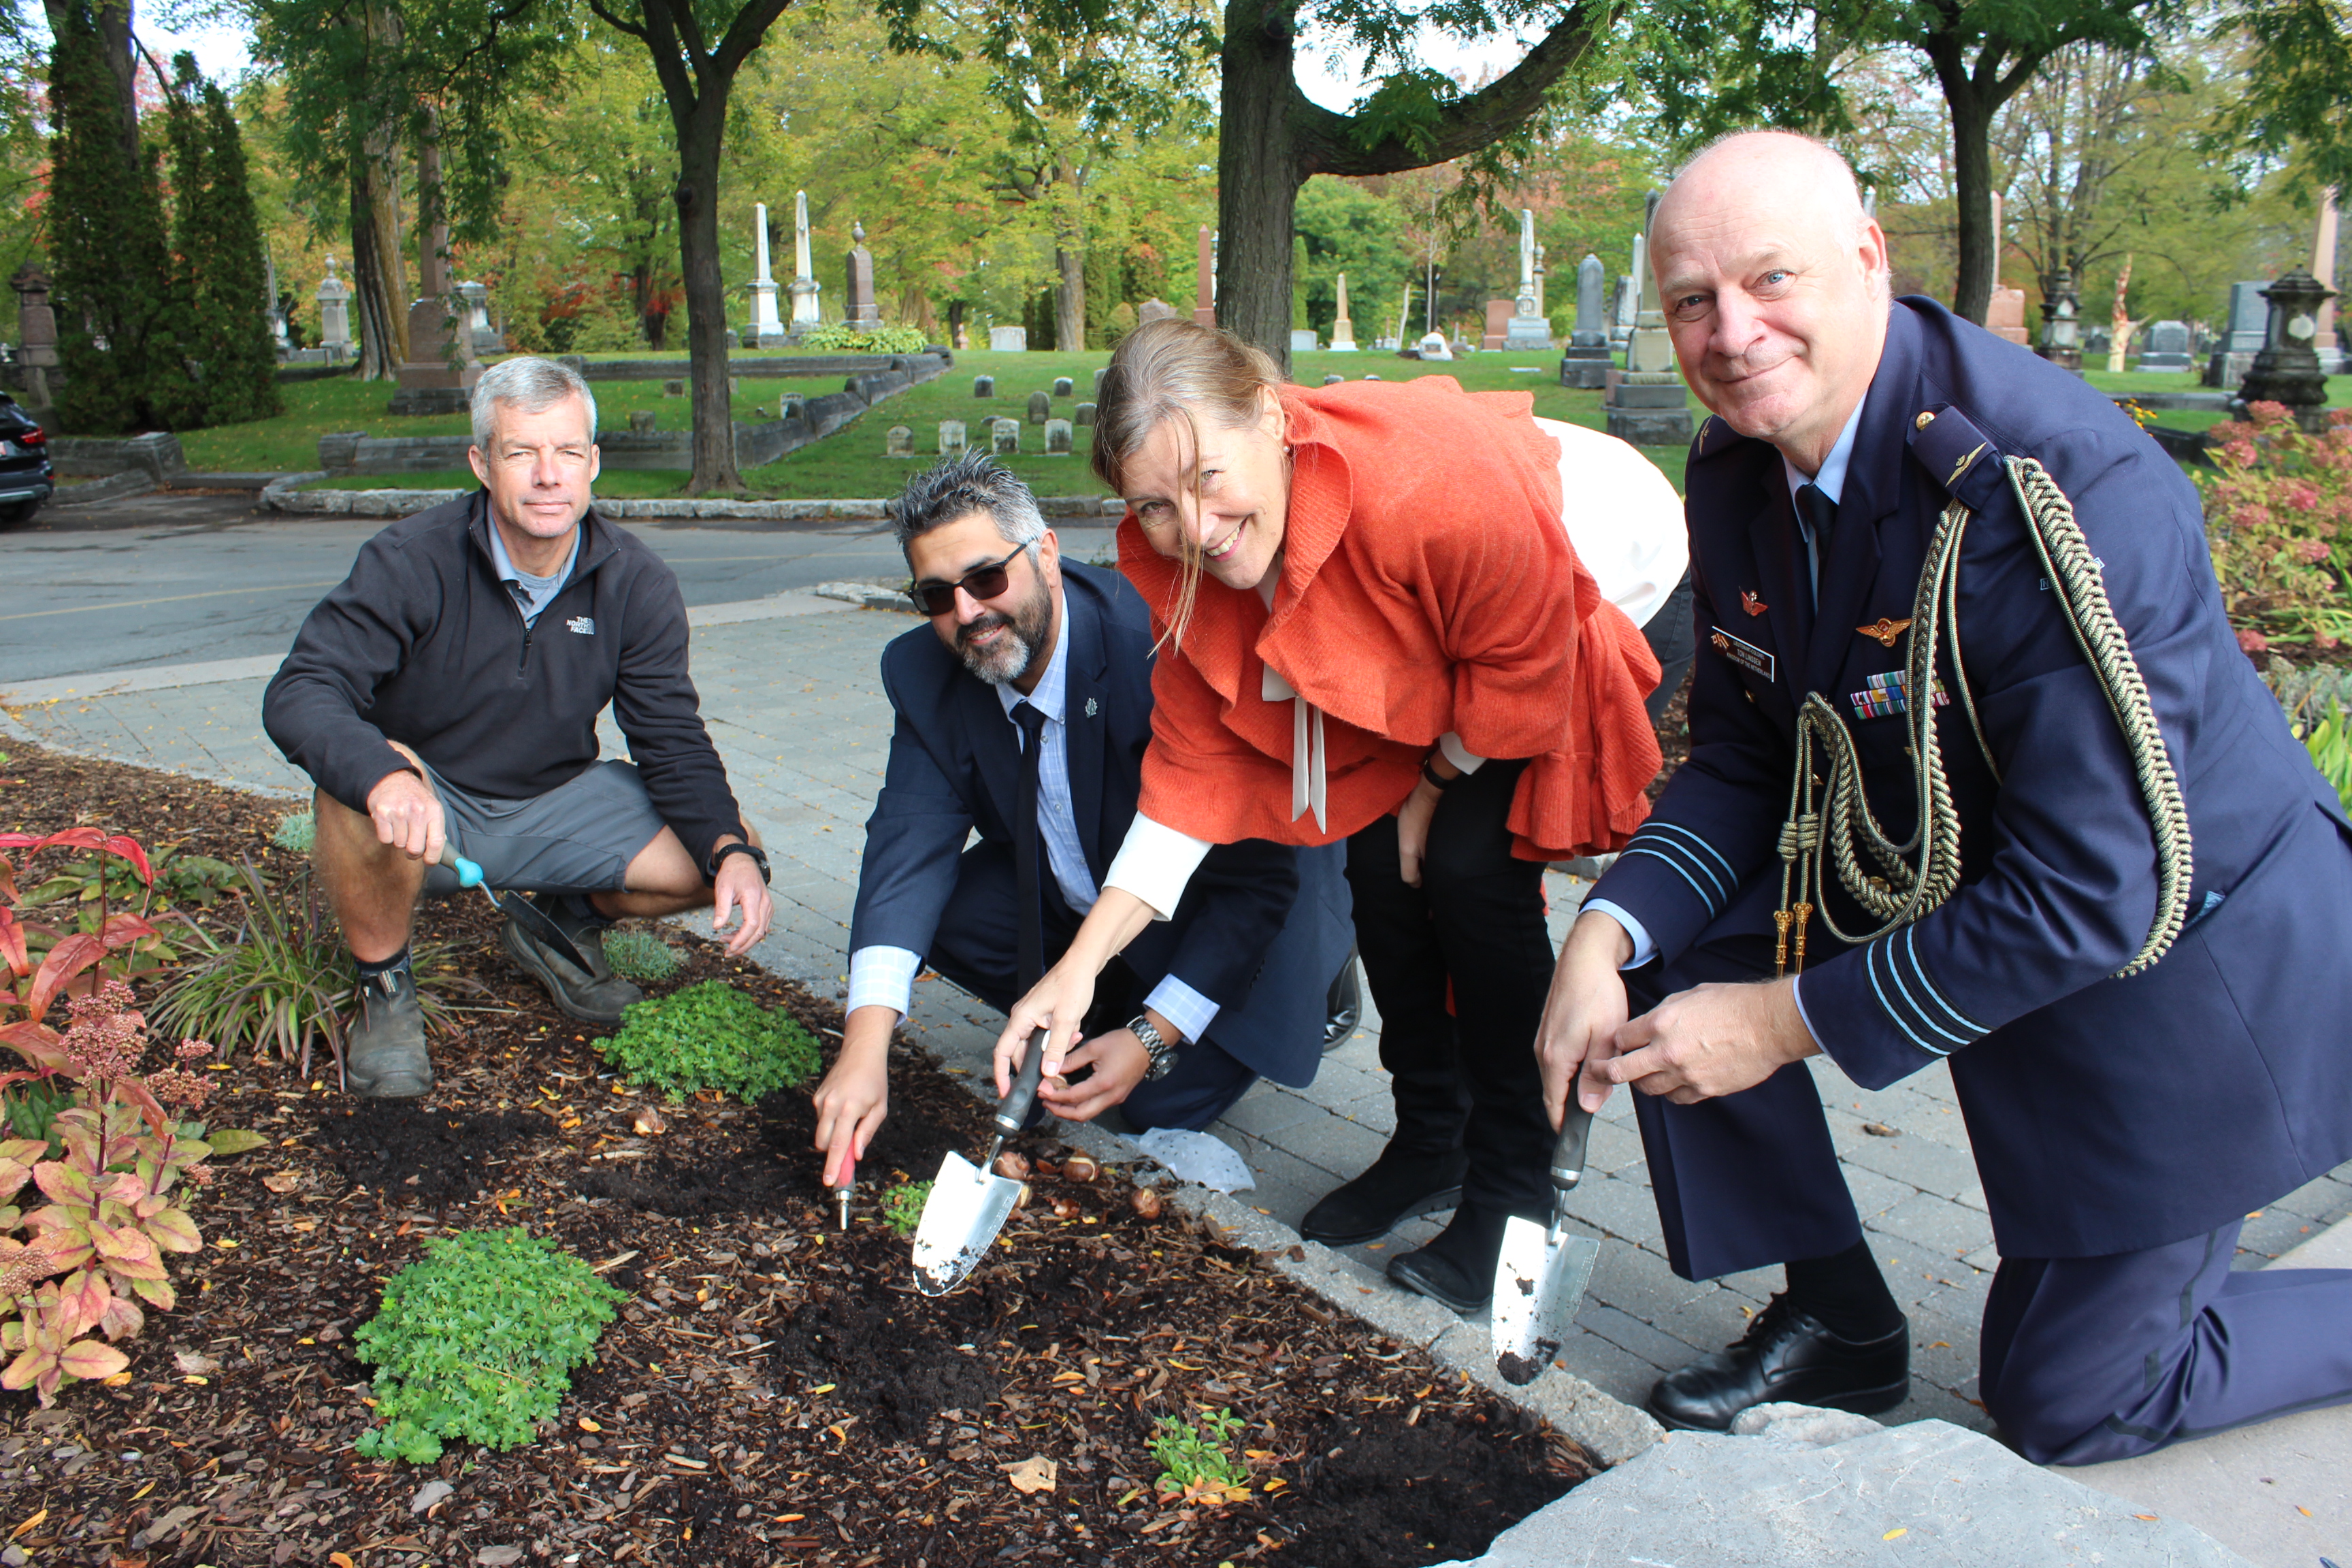 Ambassador Ines Coppoolse and Defense Attaché Ton Linssen from the Embassy of the Kingdom of the Netherlands to Canada, alongside Beechwood Cemetery’s Chief Horticulturalist, Trevor Davidson, and Nick McCarthy